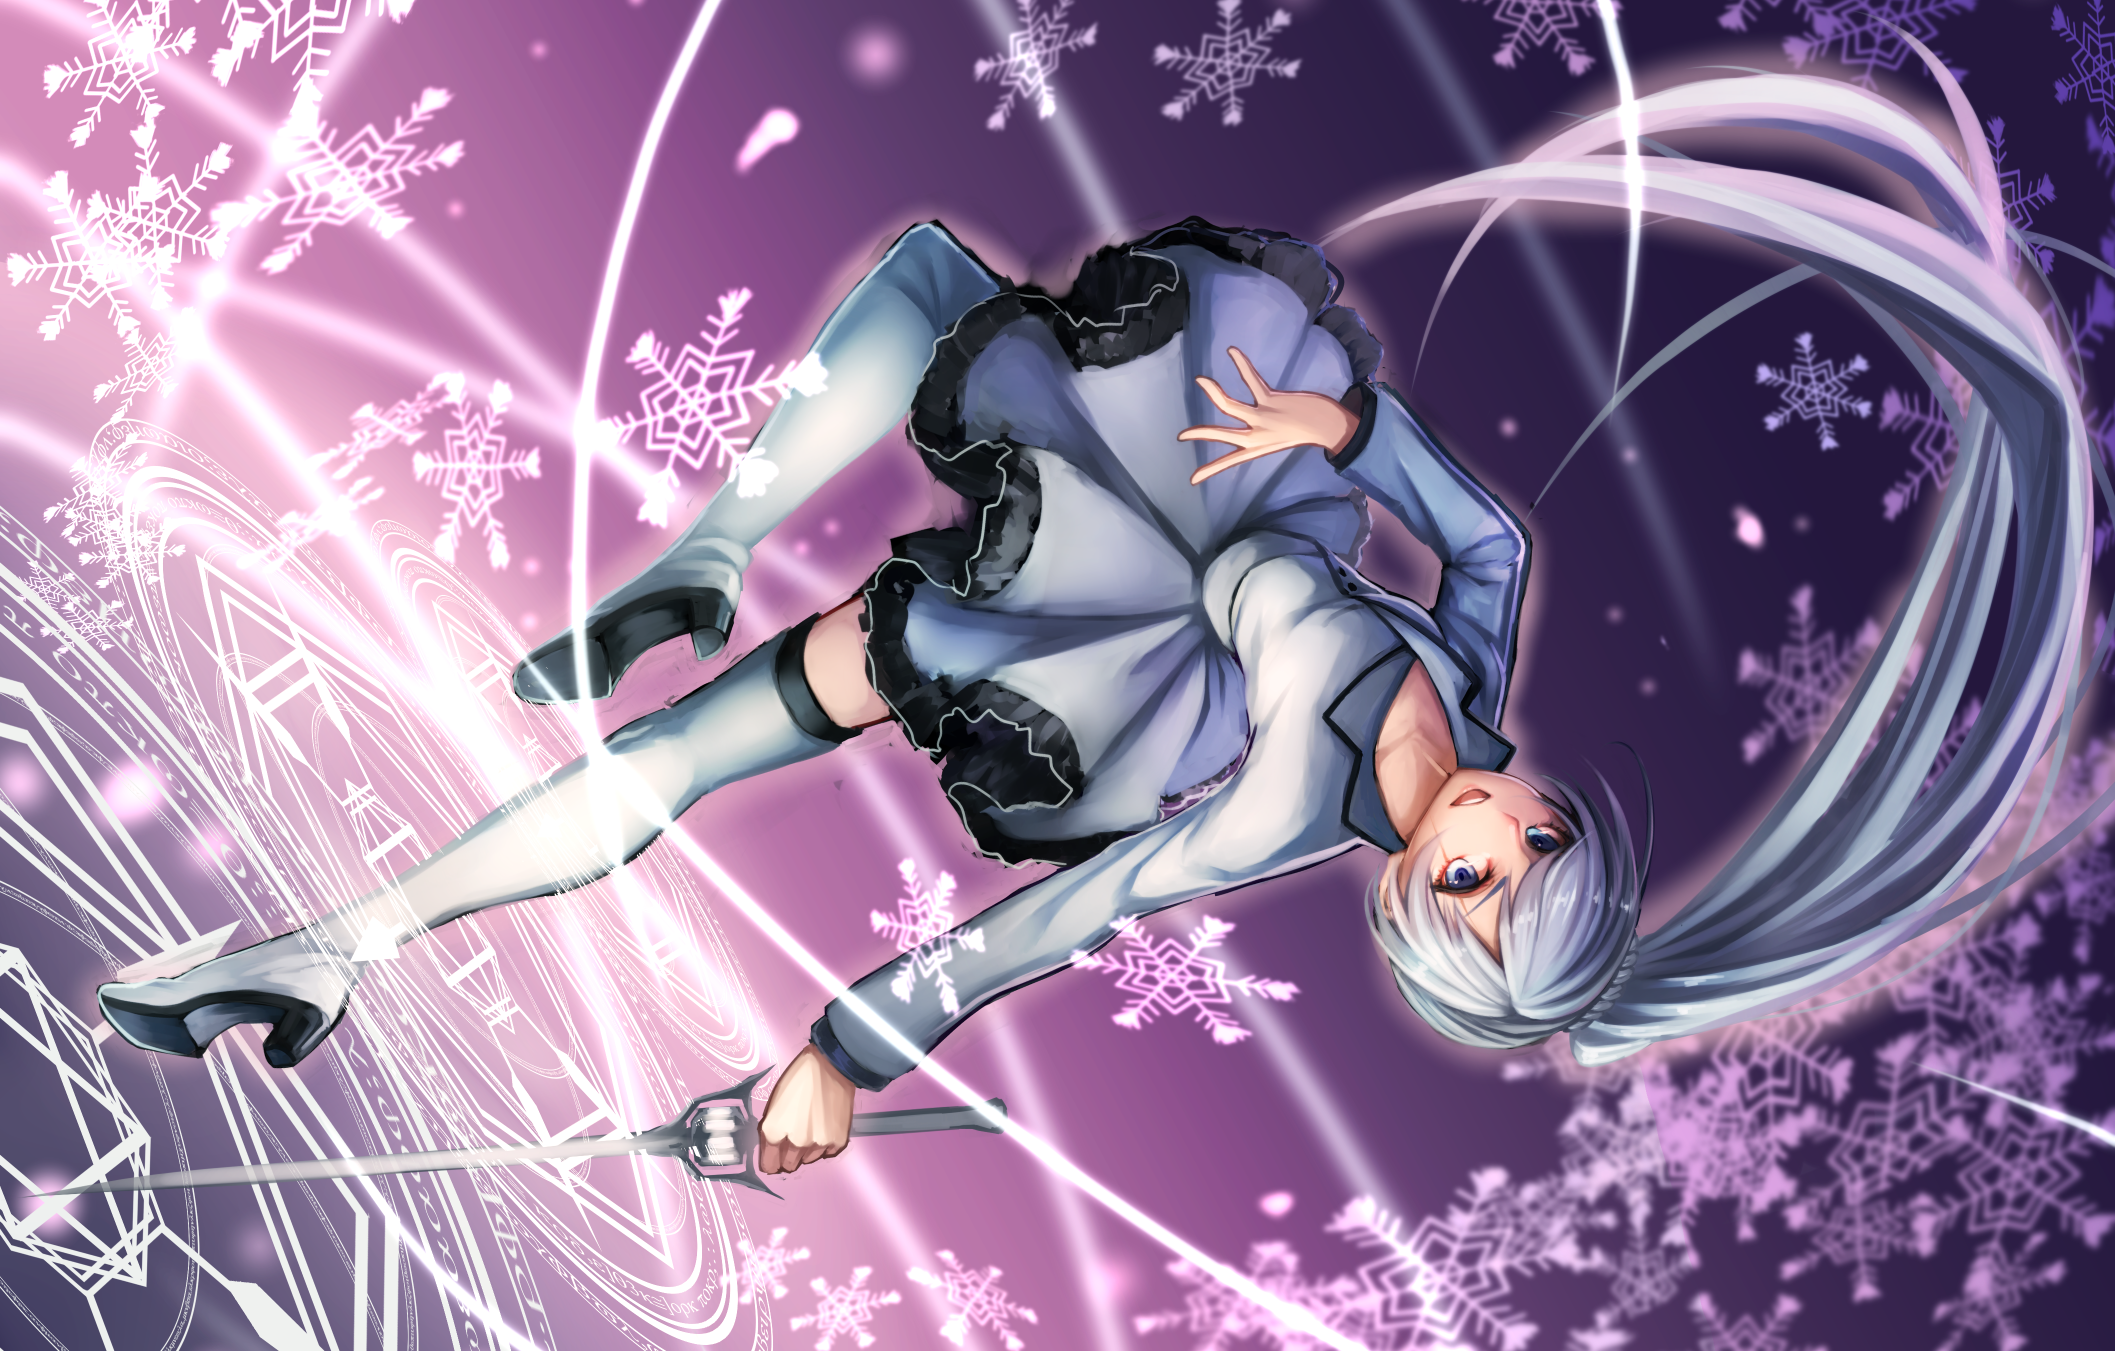 weiss wallpaper,fictional character,cg artwork,graphic design,illustration,space